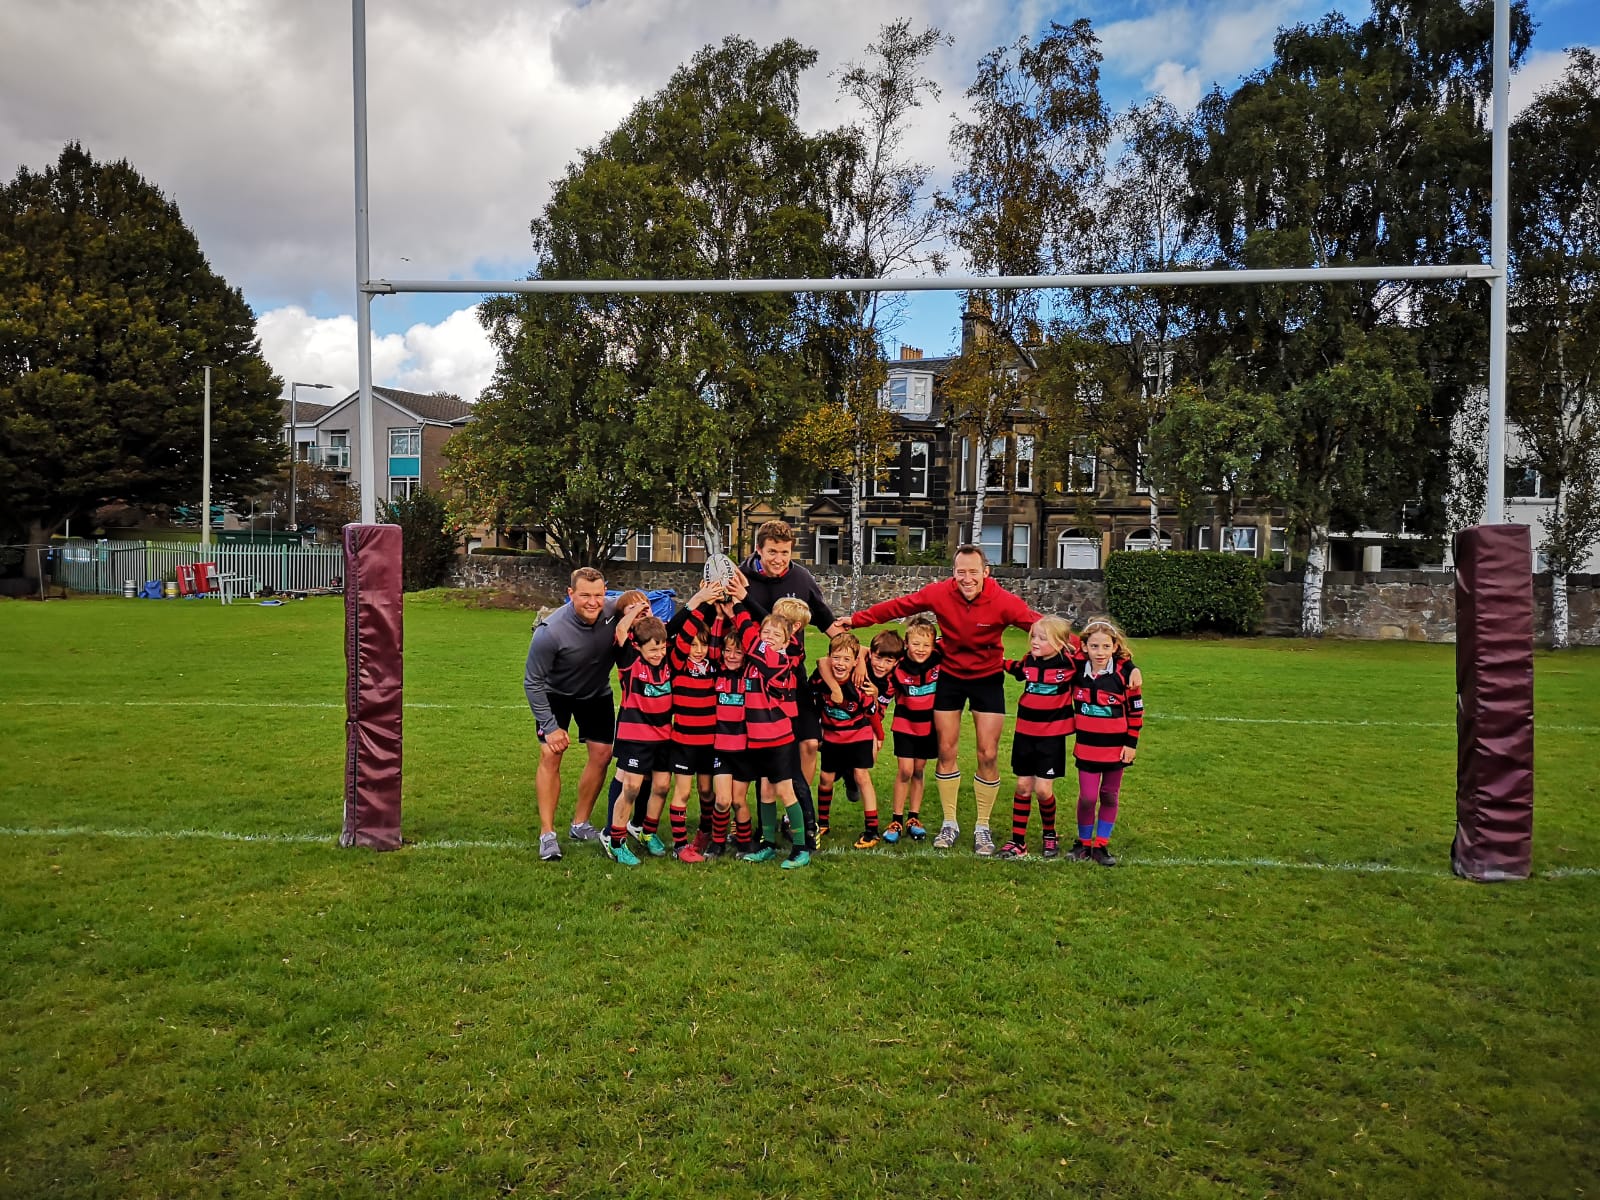 CALA Homes scores two tries with North Berwick community